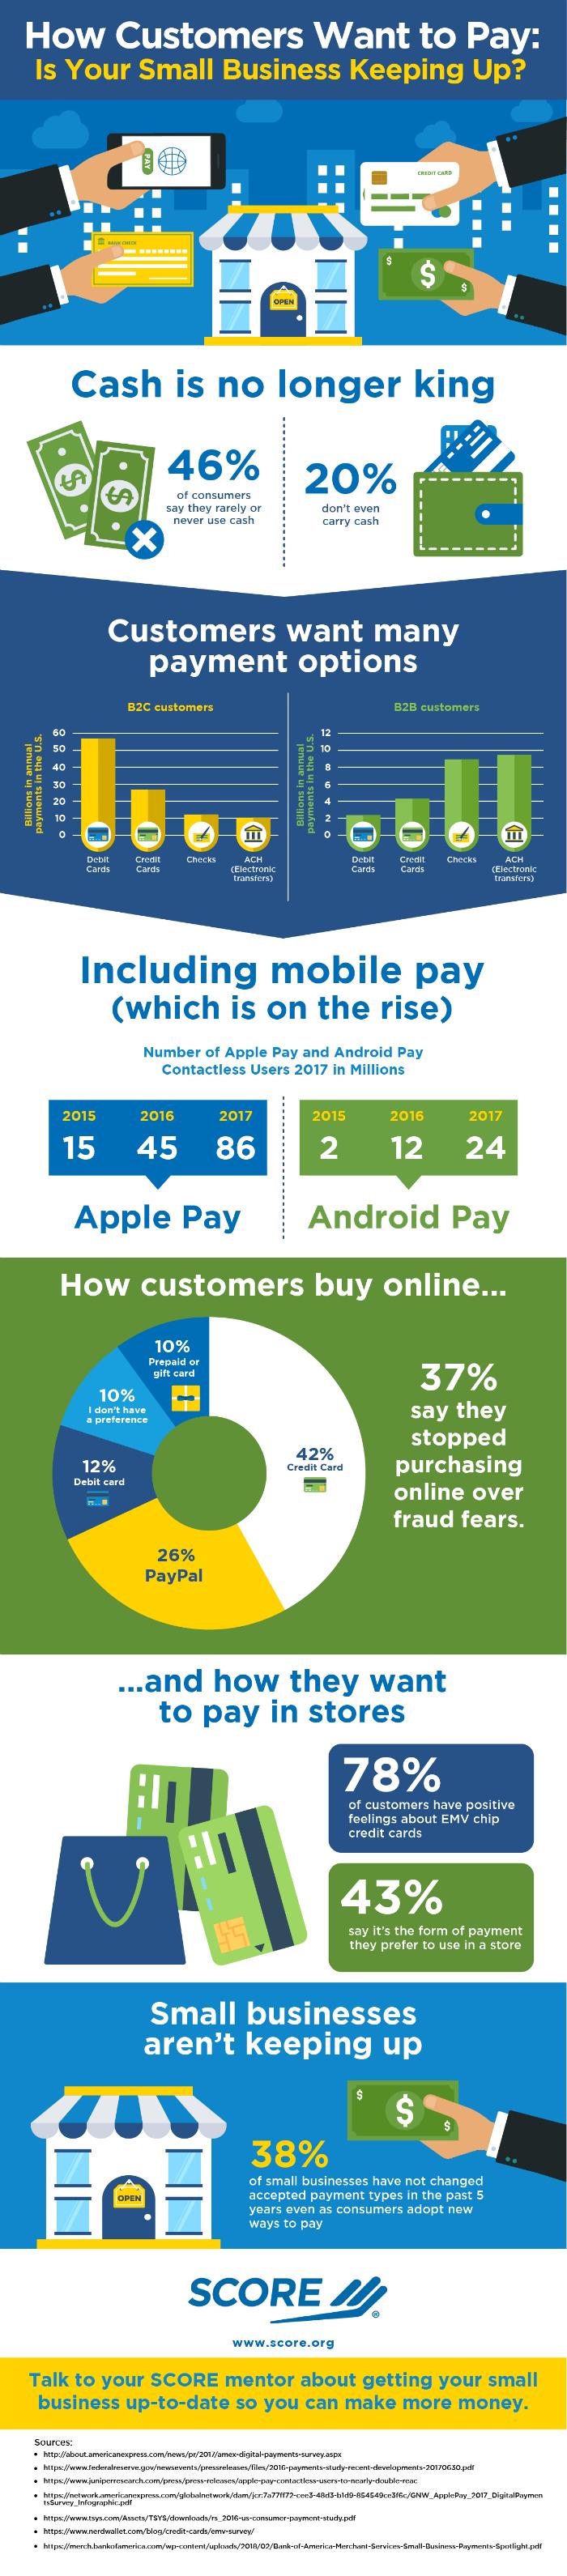 Infographic: How Customers Want to Pay - Is Your Small Business Keeping Up? | SCORE